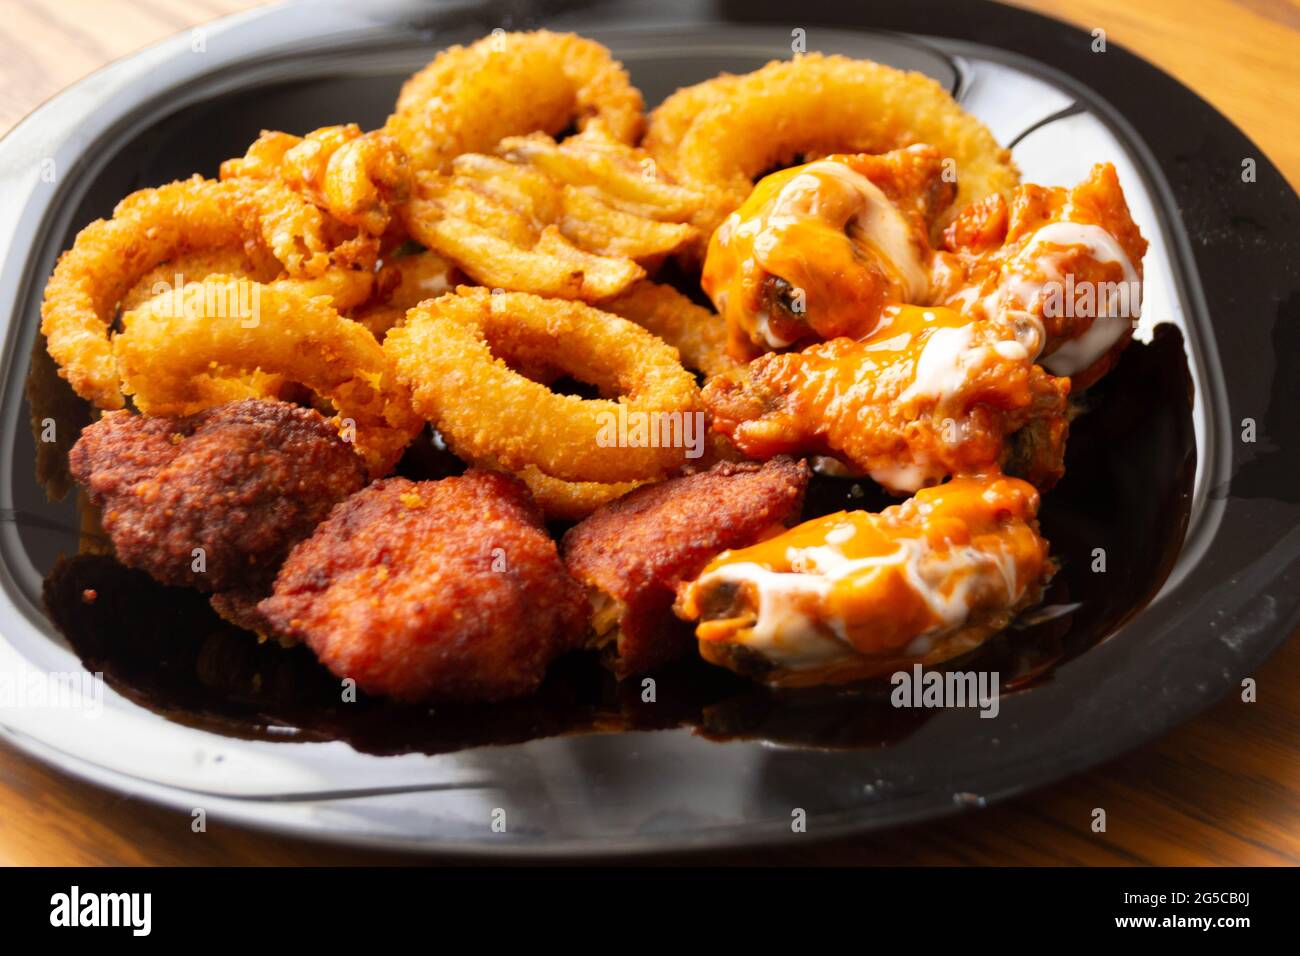 Photograph of a plate of chicken wings with onion rings and criscut fries Stock Photo